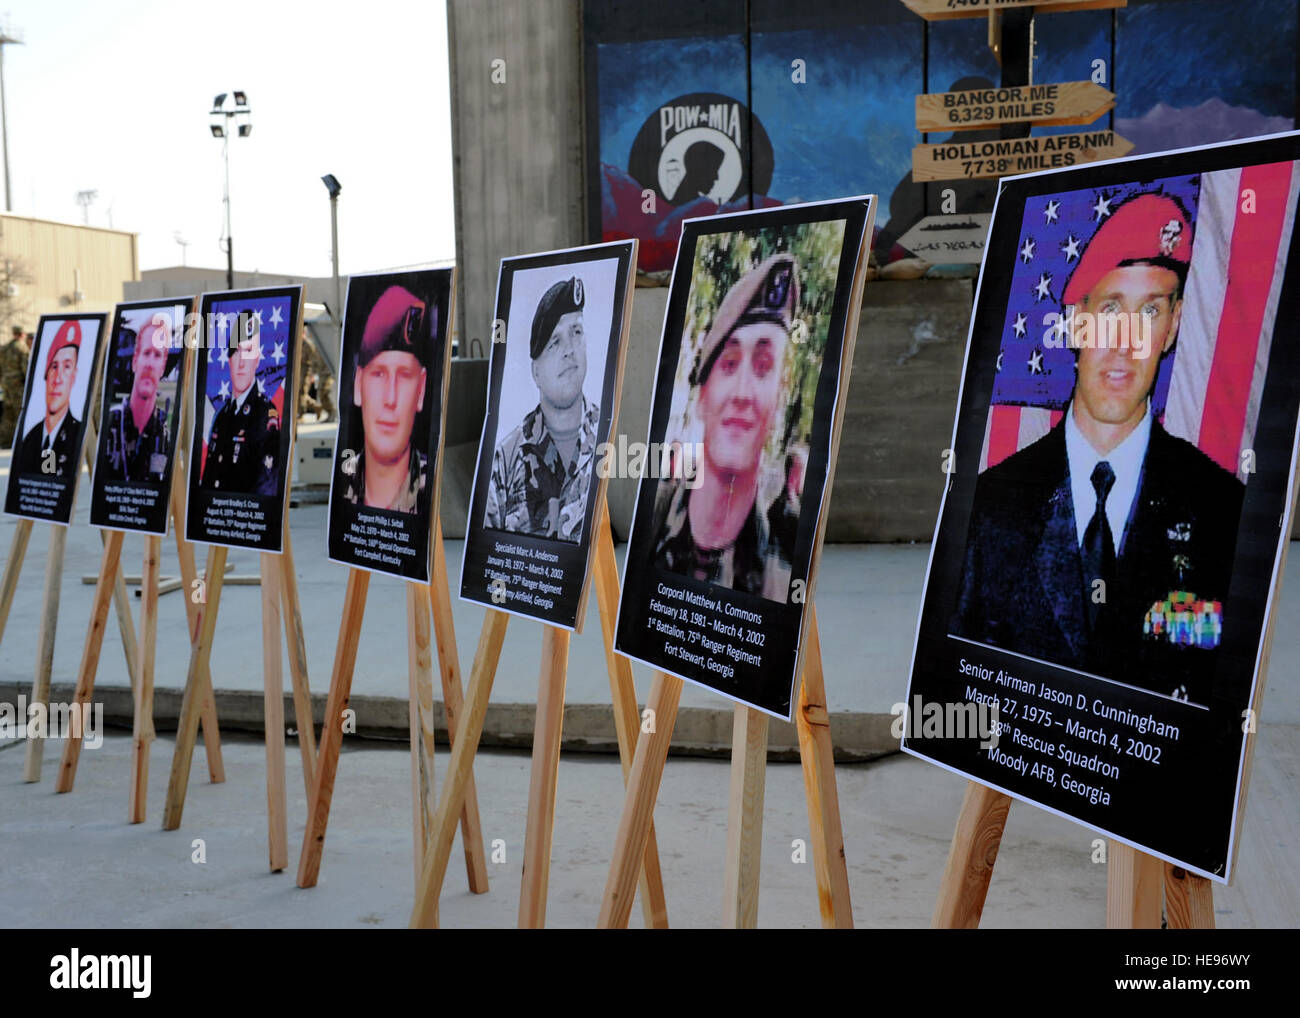 (From right to left) Posters of U.S. Air Force Senior Airman Jason Cunningham, U.S. Army Cpl. Matthew Commons, U.S. Army Spc. Marc Anderson, U.S. Army Sgt. Phillip Svitak, U.S. Army Sgt. Bradley Crose, U.S. Navy Petty Officer 1st Class Neil Roberts and U.S. Air Force Tech. Sgt. John Chapman, special operators killed during Operation Anaconda March 4, 2002, are displayed in preparation for a remembrance ceremony March 3, 2015 at Bagram Air Field, Afghanistan. Service members from all branches conducted a 24-hour vigil run and a retreat ceremony to honor the 13th anniversary of their deaths and  Stock Photo